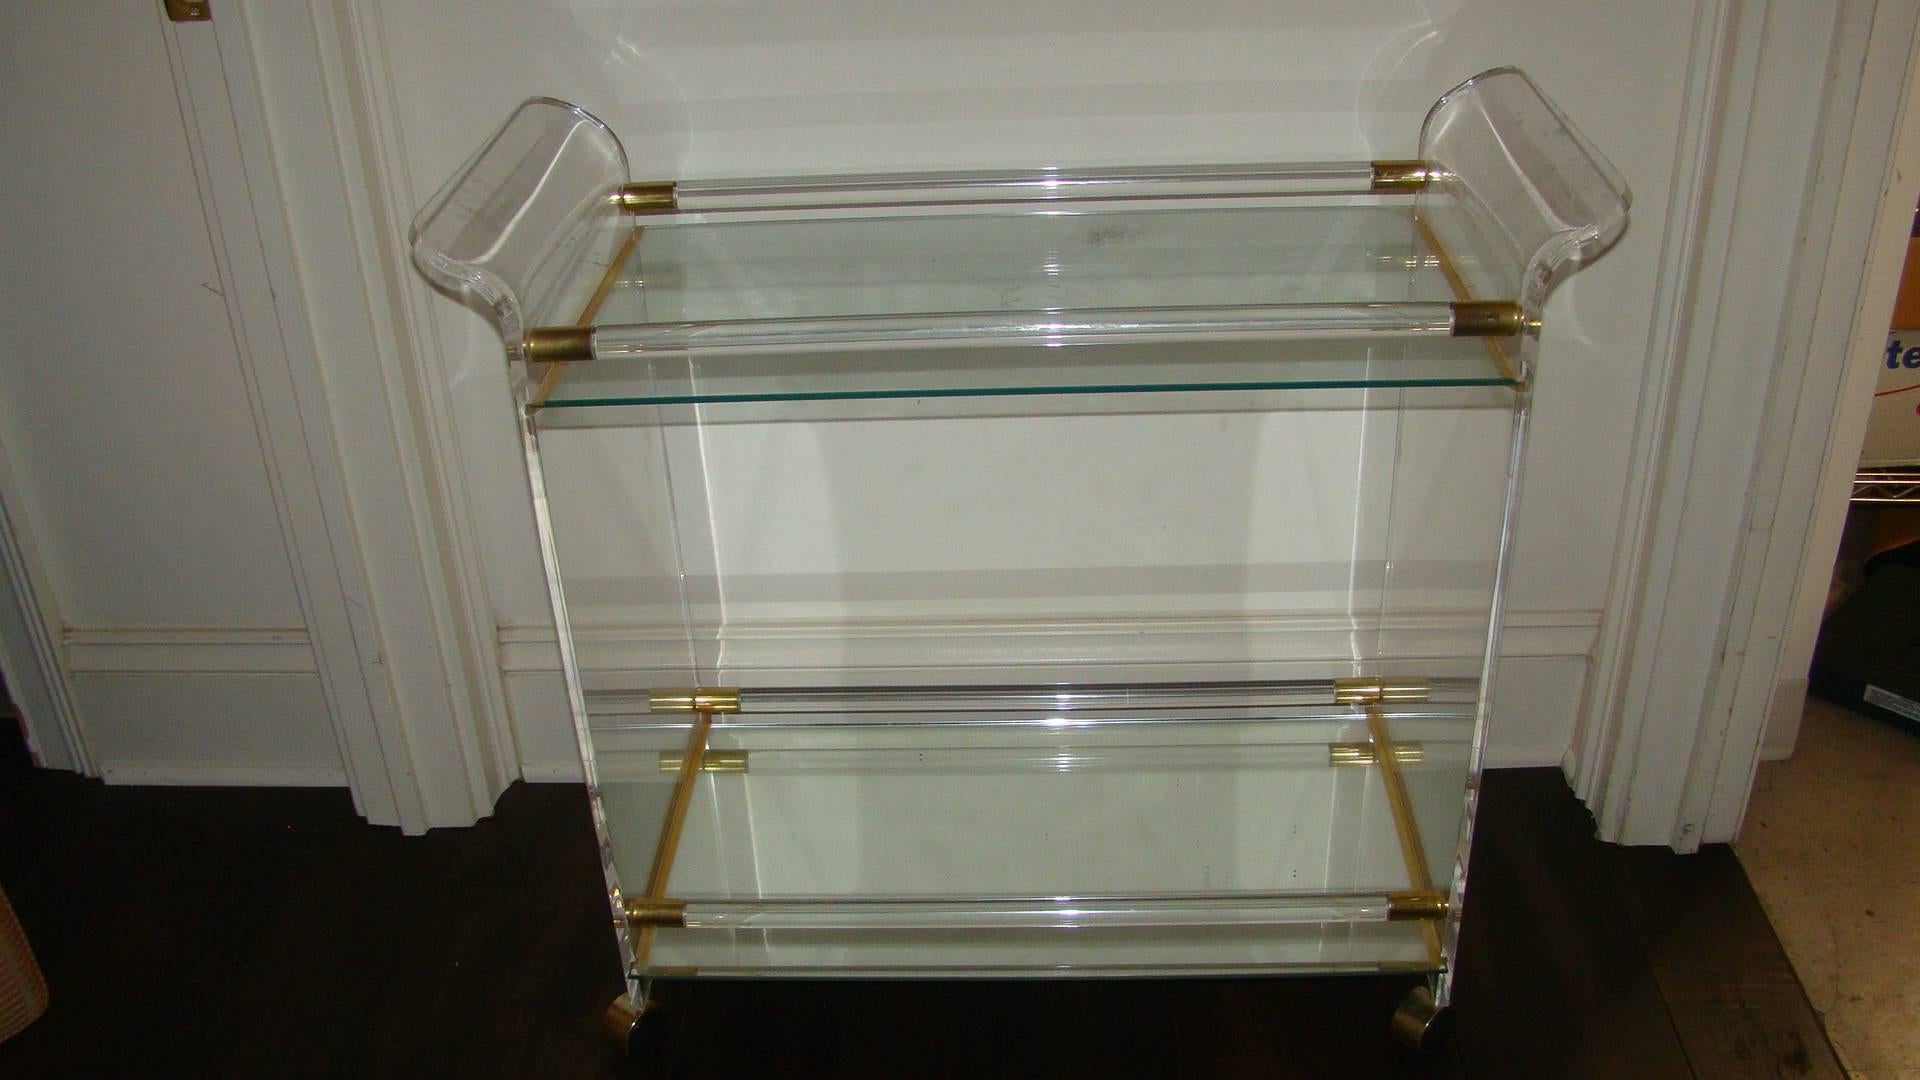 Beautiful Lucite and brass sculptural bar cart. Comprised of crystal clear Lucite with waterfall style designed handles and brass accents. Bottom shelf is mirror, top is glass. Perfect for bar or serving.